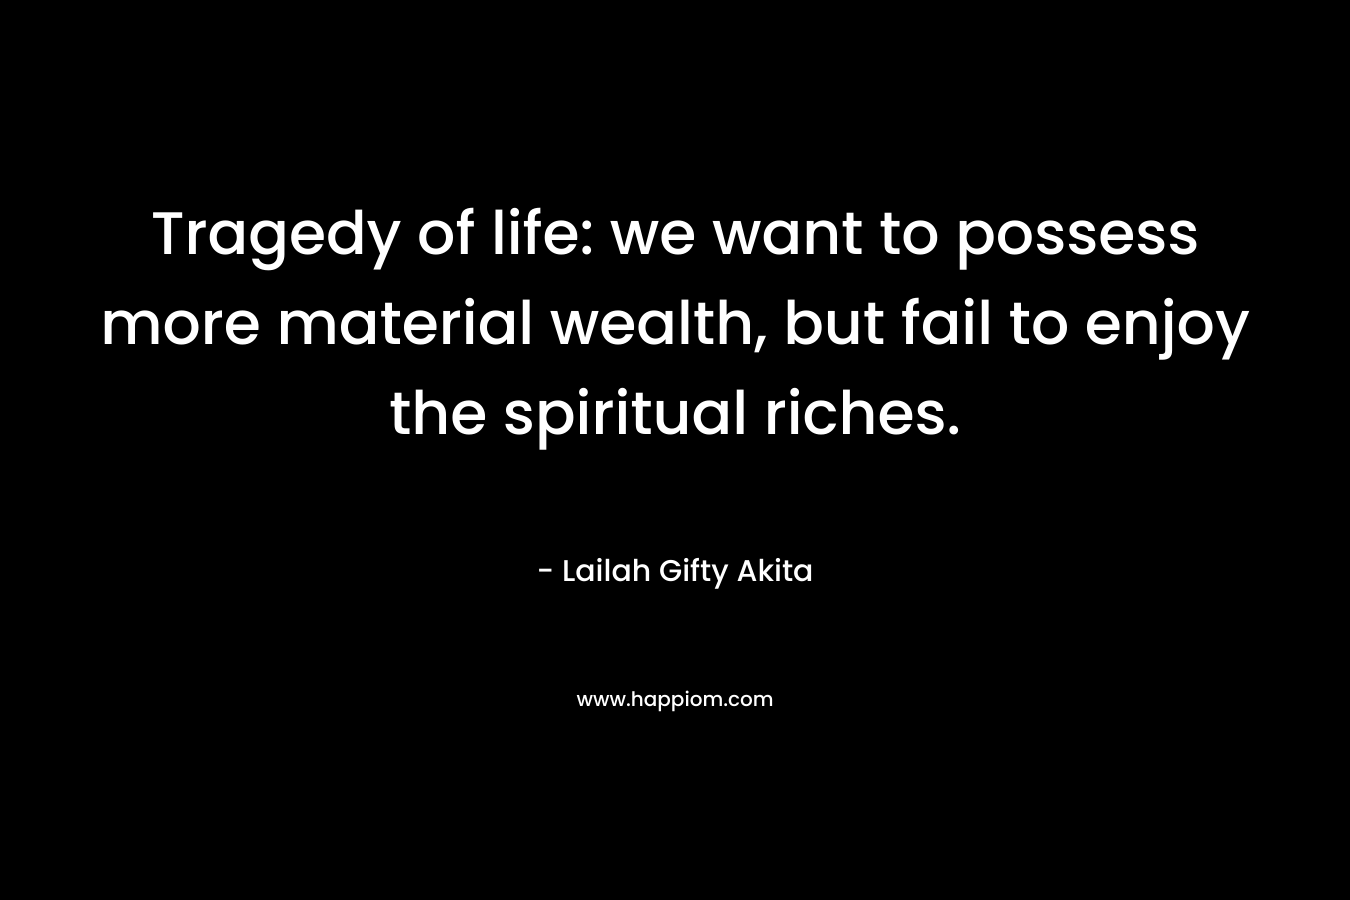 Tragedy of life: we want to possess more material wealth, but fail to enjoy the spiritual riches.